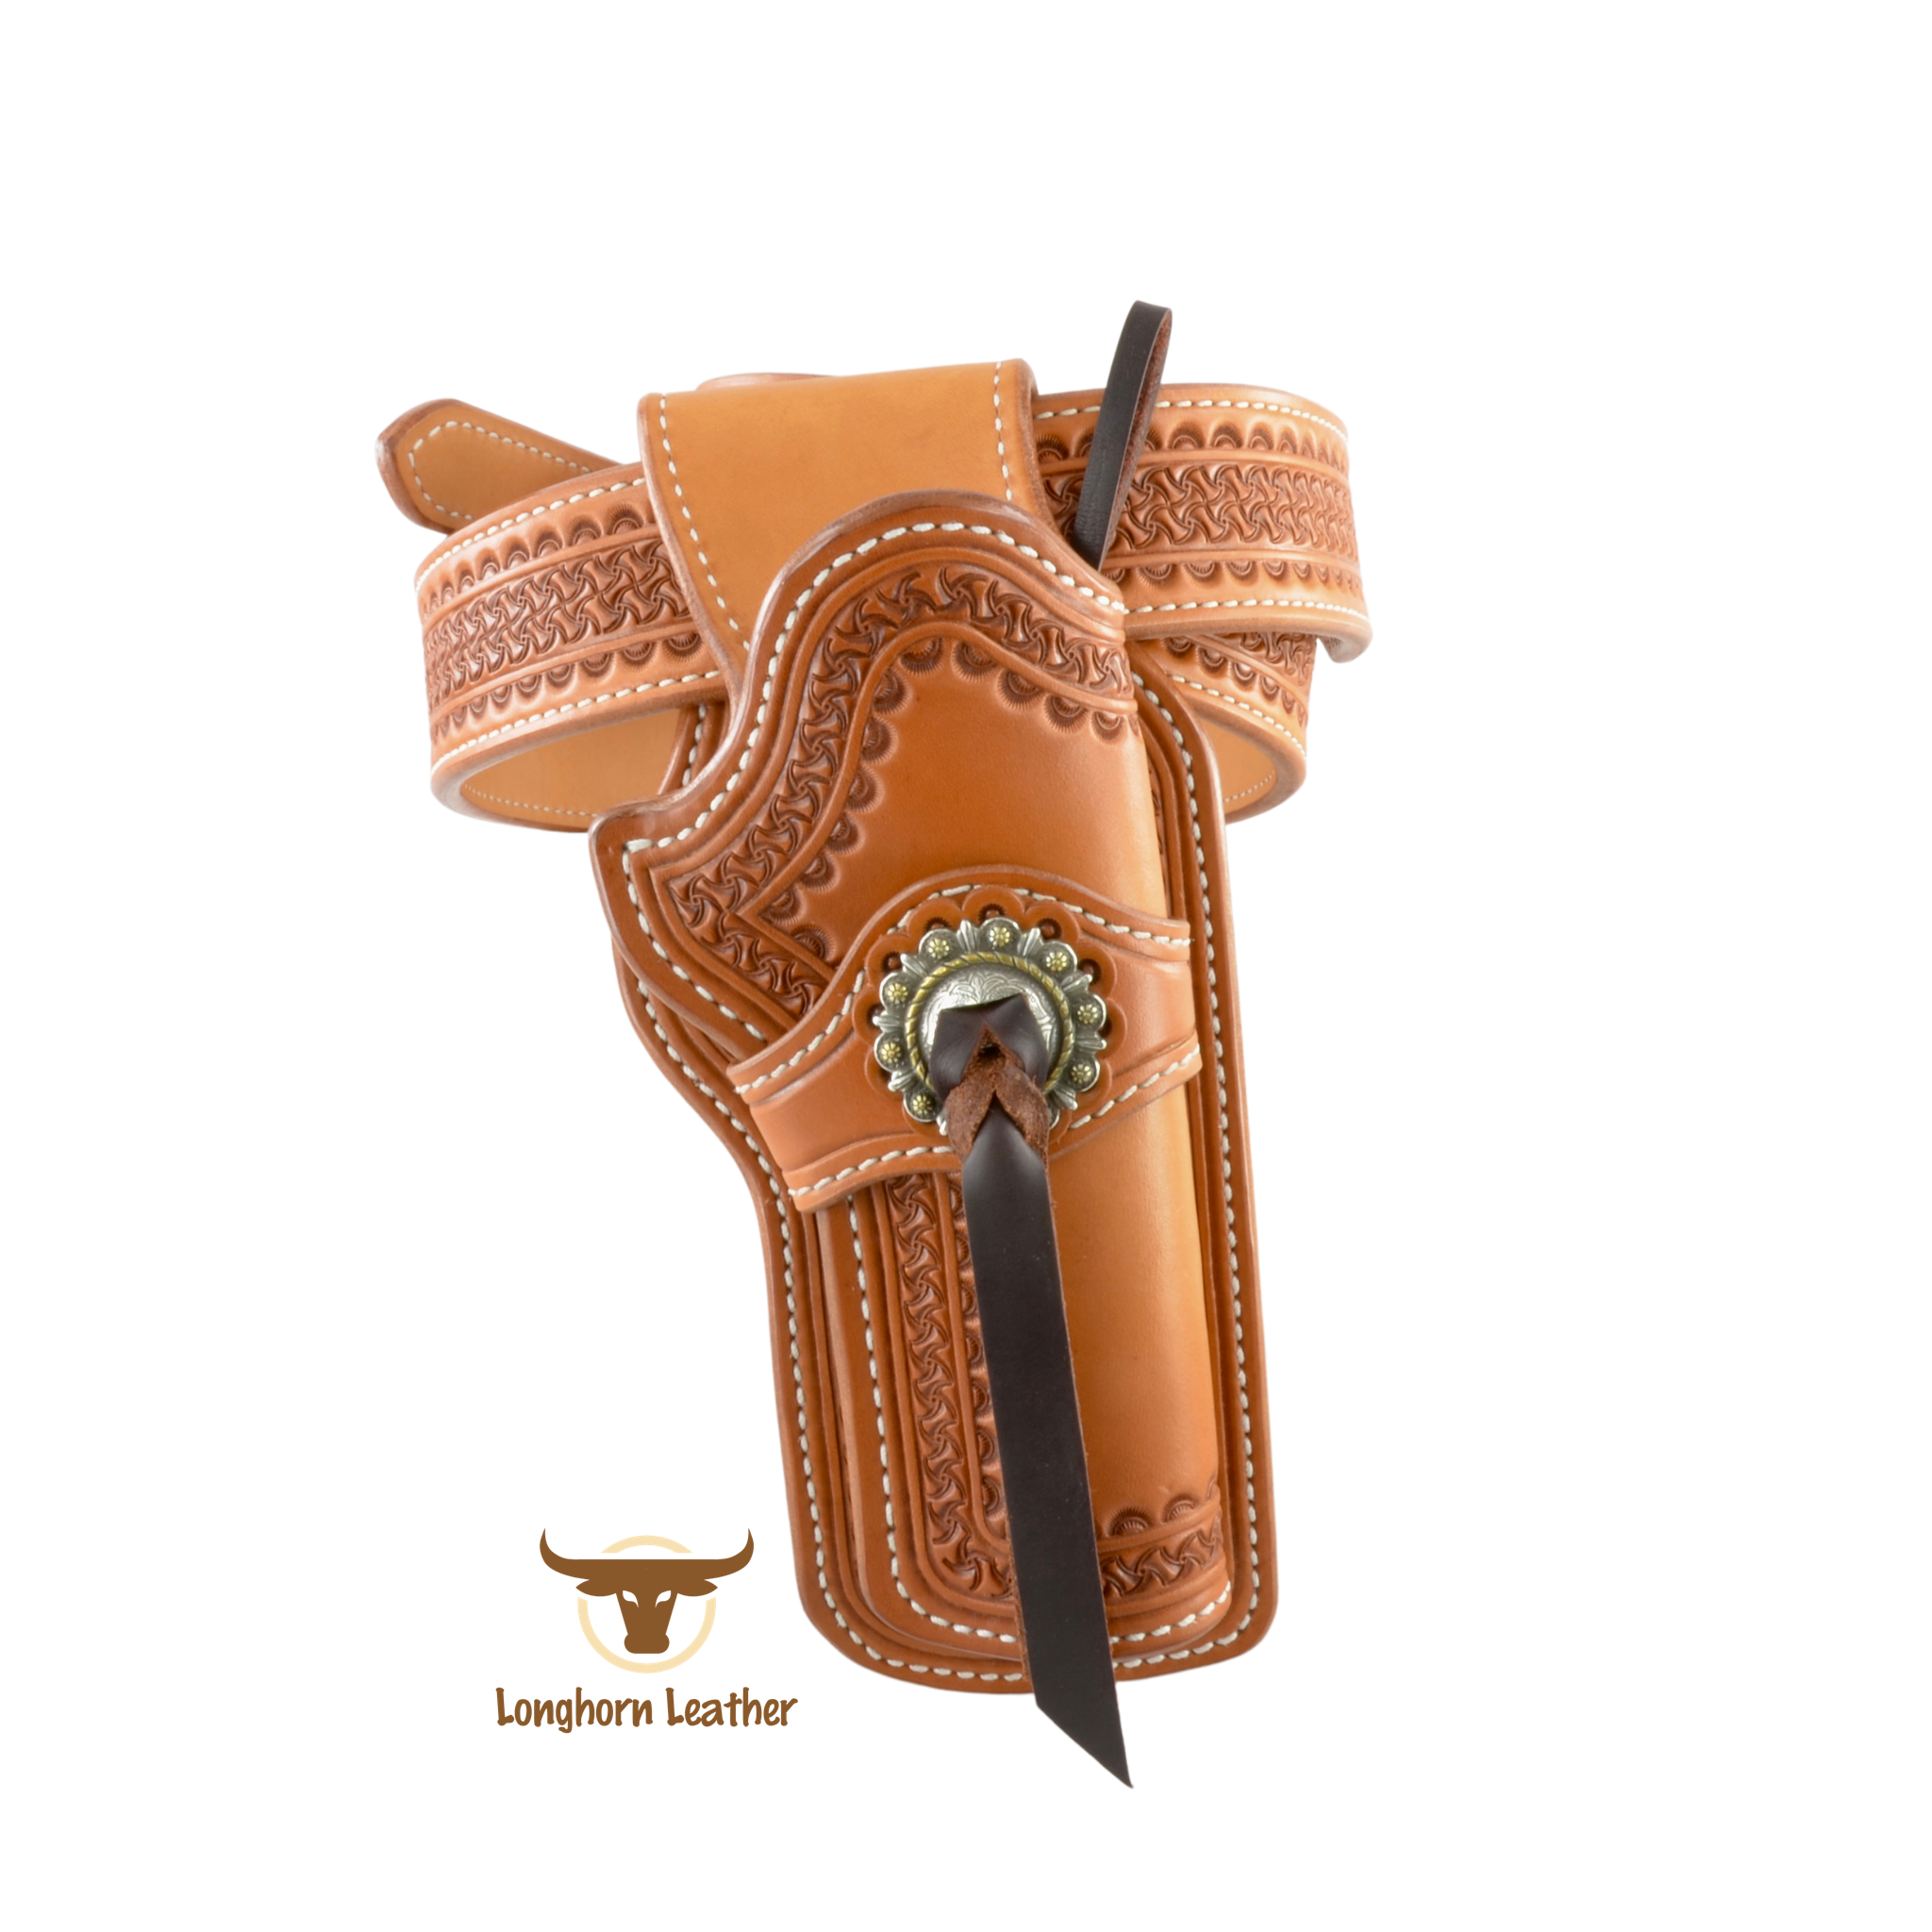 Custom leather single action holster and gun belt featuring the "Kingman" design.  Individually handcrafted at Longhorn Leather AZ